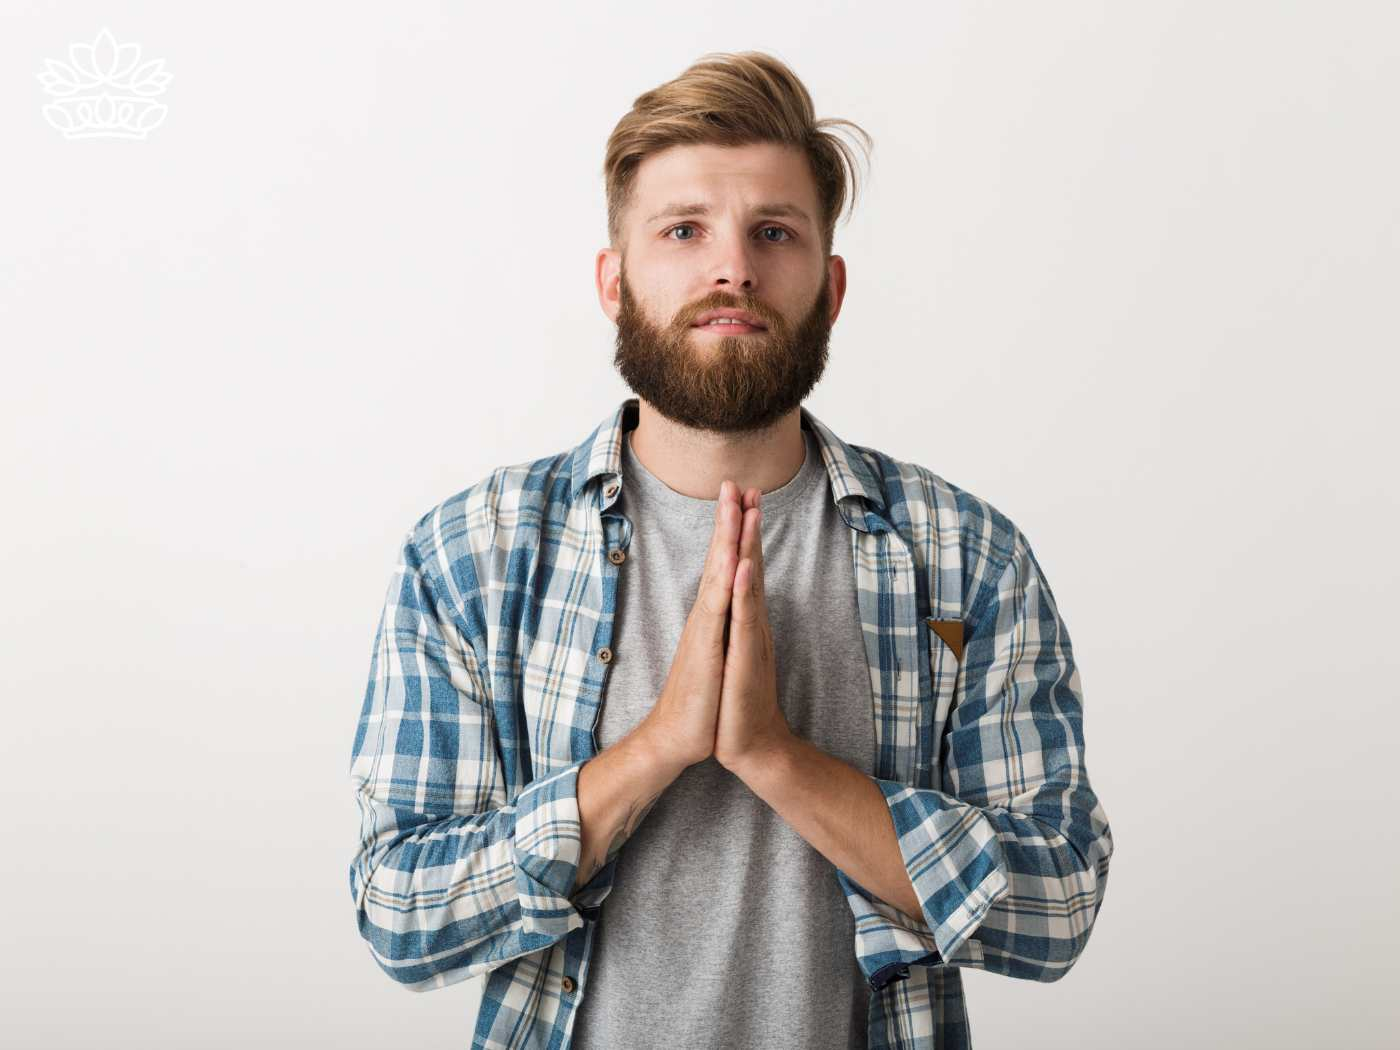 A sincere young man with a beard in a plaid shirt, pressing his hands together in a gesture of apology, expressing regret and a desire to speak and resolve hurt. This image is part of the 'I'm Sorry' Collection from Fabulous Flowers and Gifts, designed to convey love and sincerity.